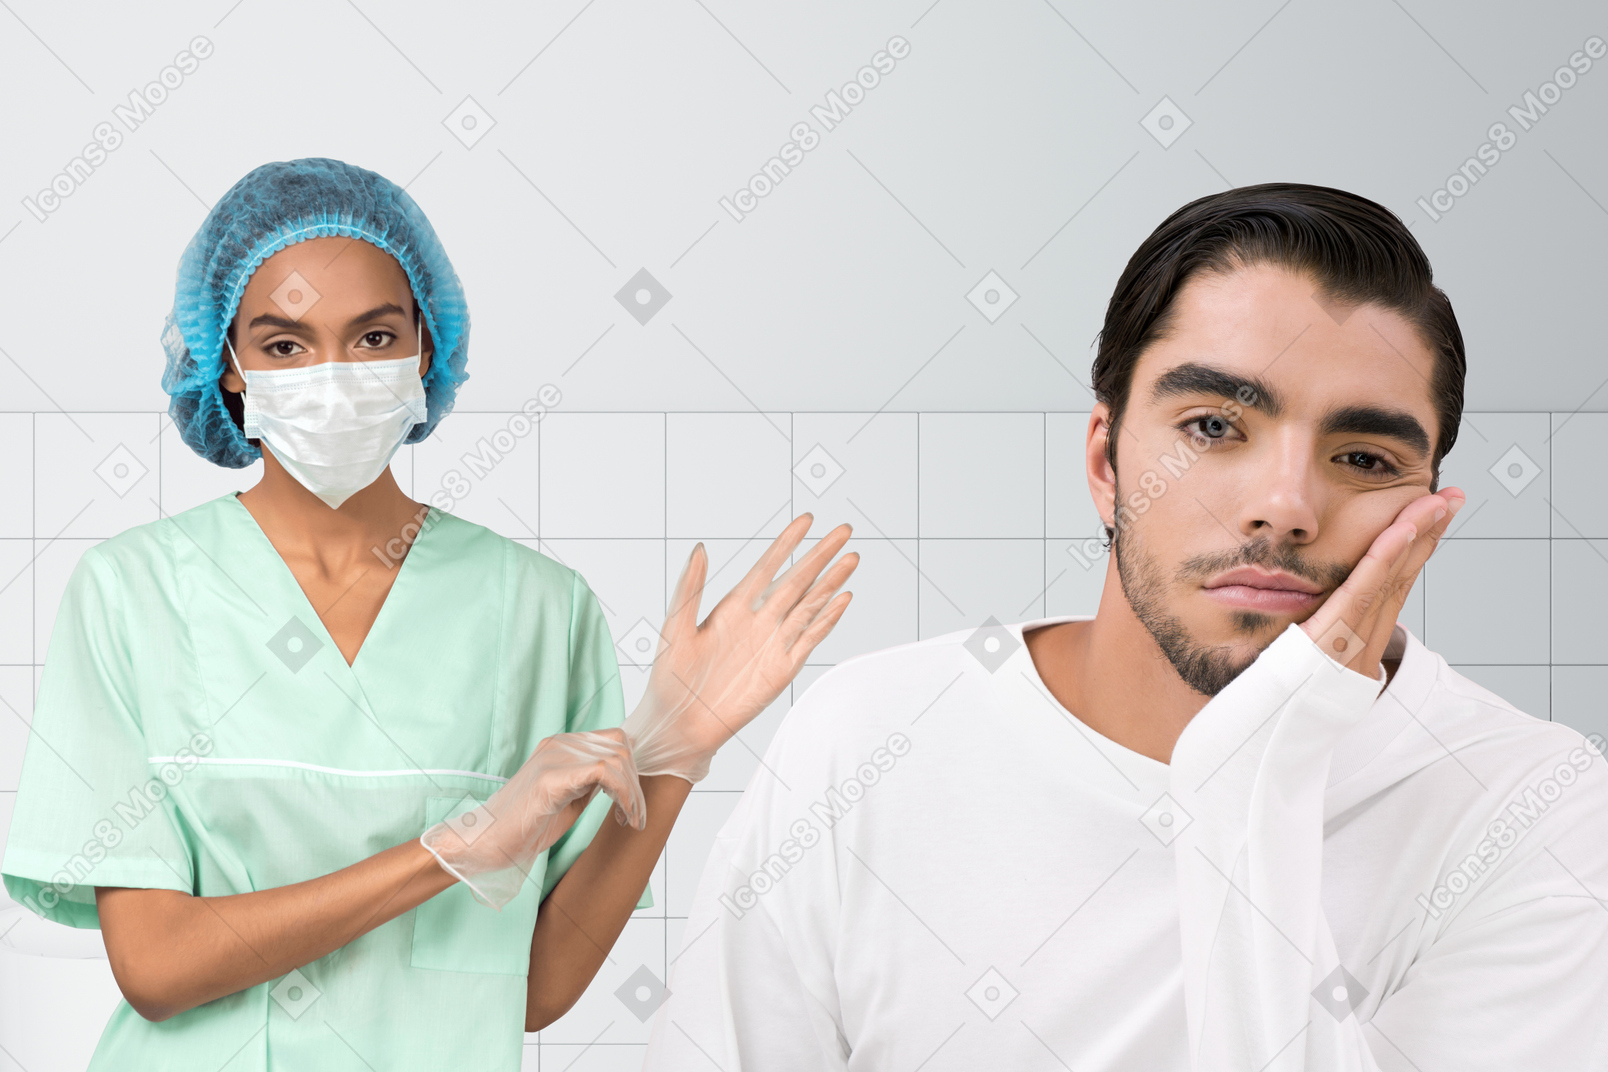 Female doctor putting on gloves and patient leaning chin on hand